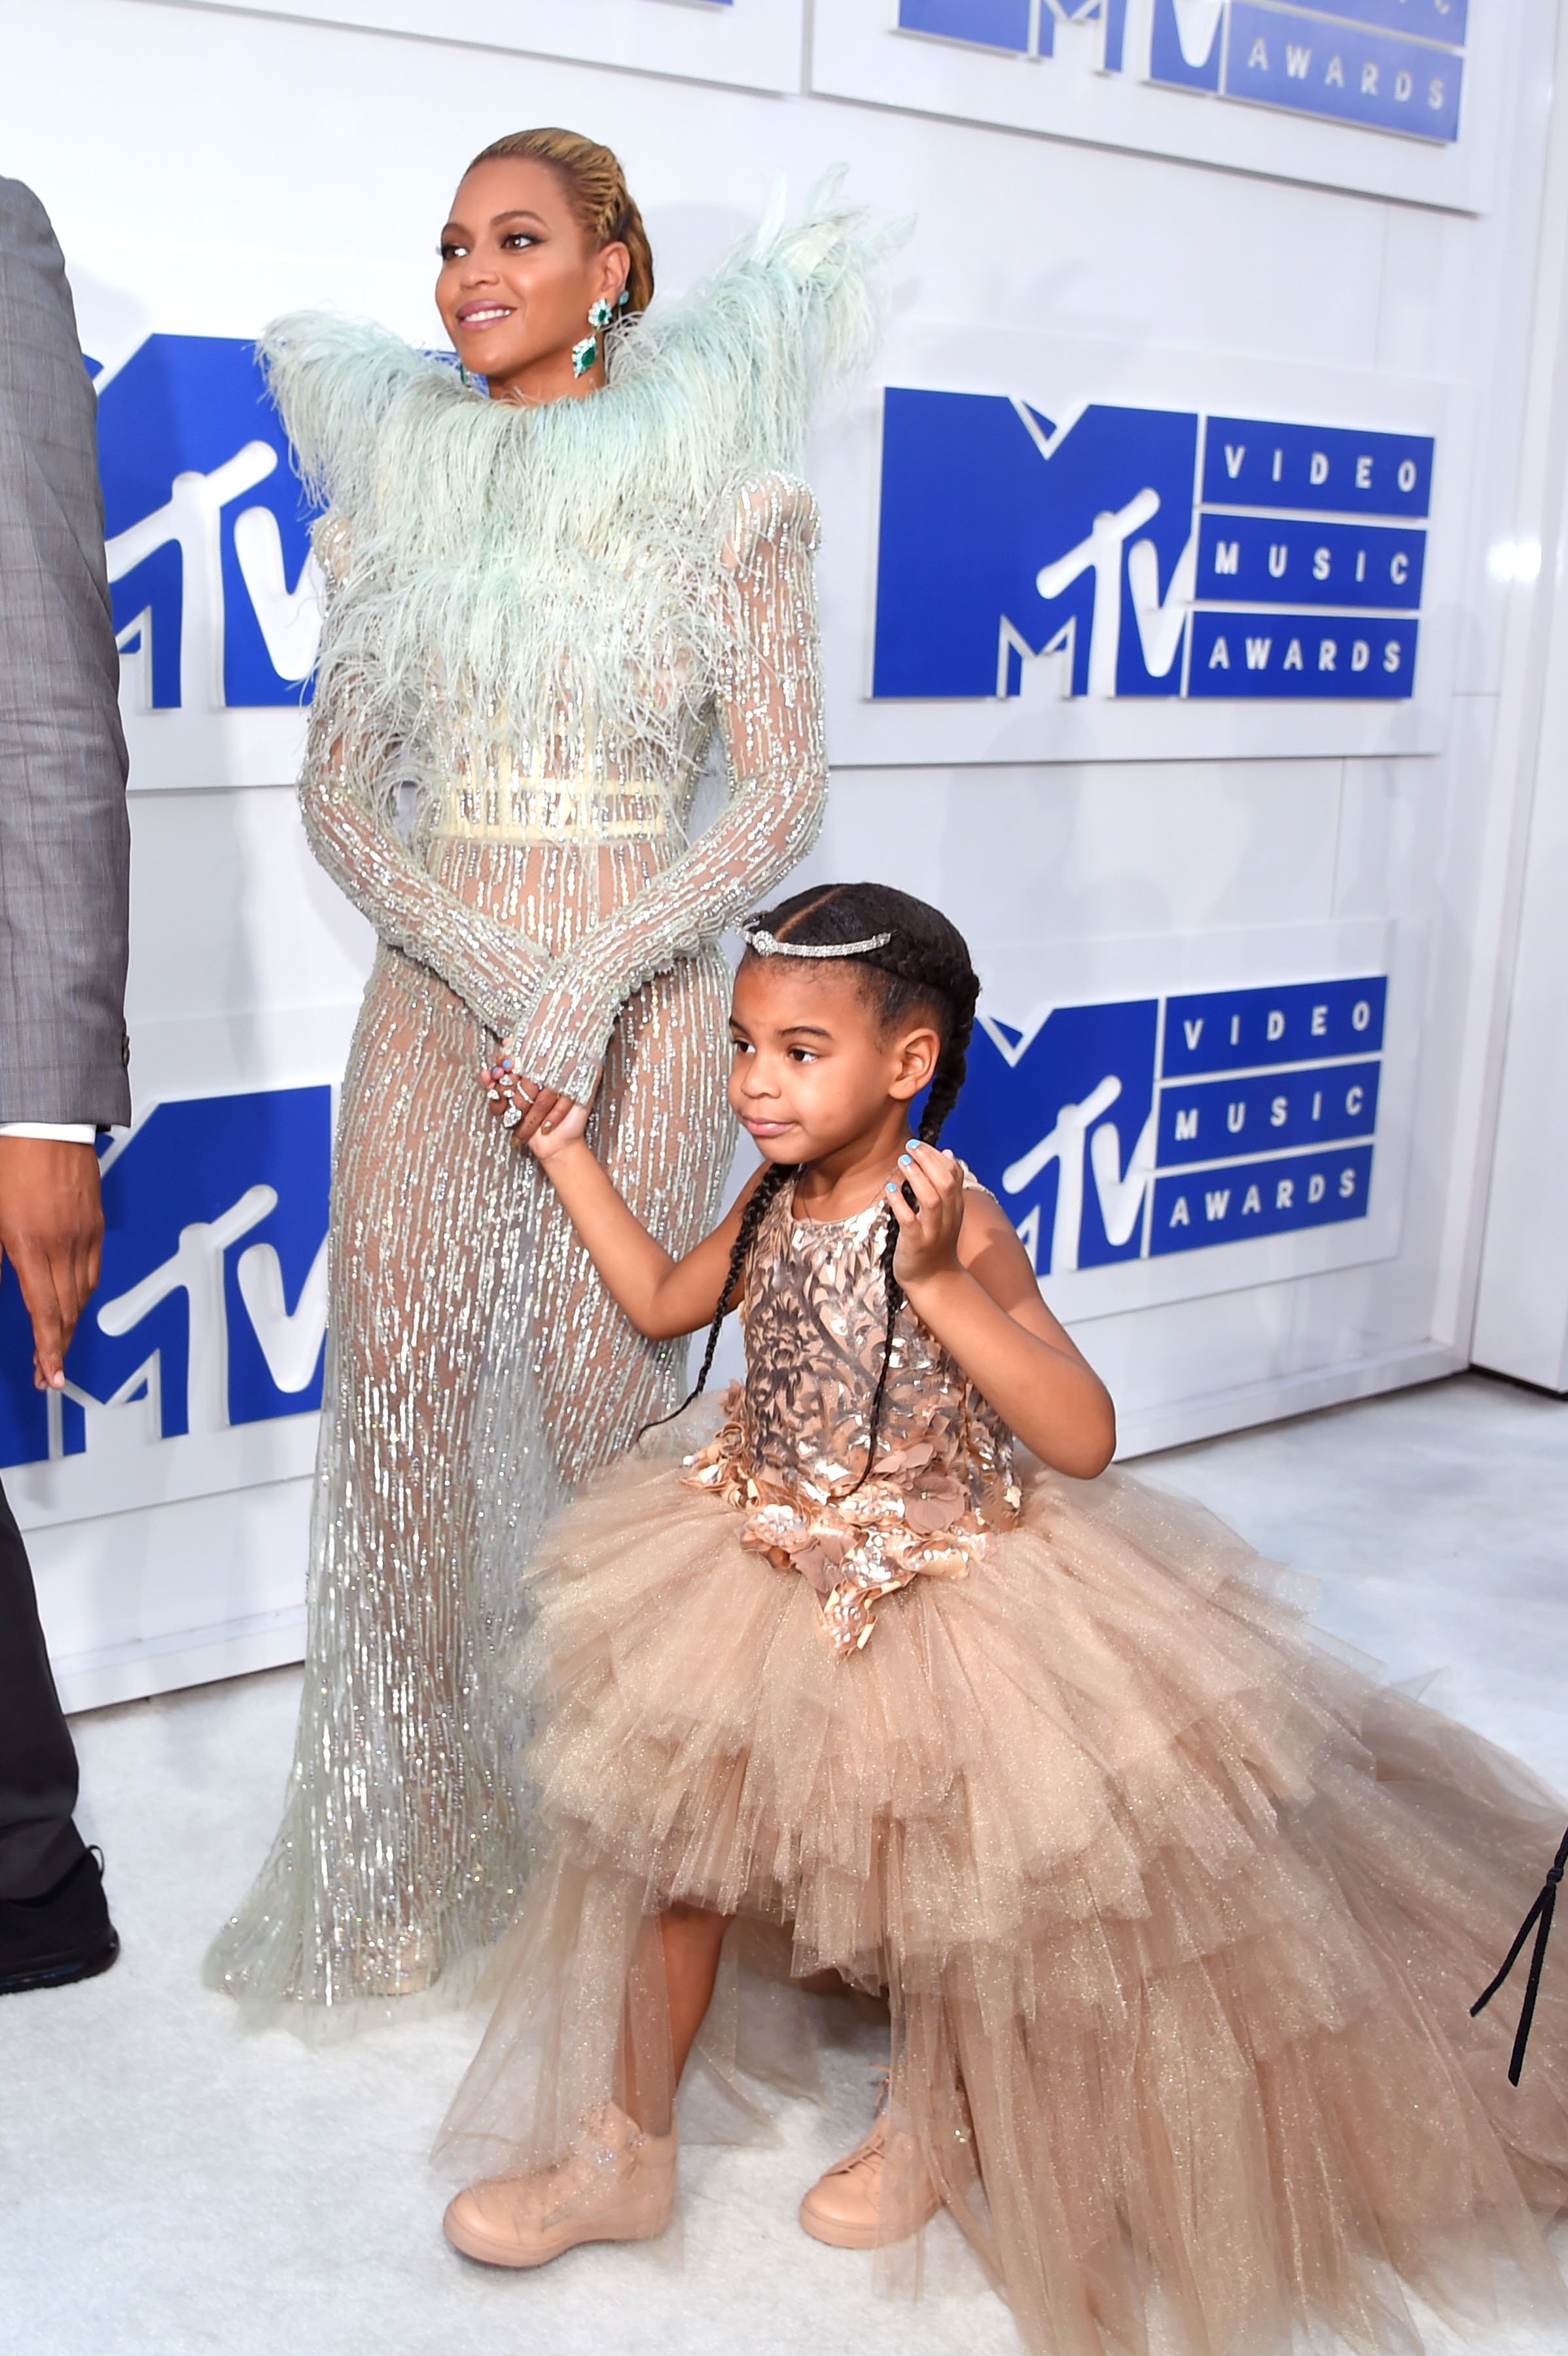 Beyonce and Blue Ivy at the 2016 MTV Video Music Awards in New York City on Aug. 28, 2016. | Photo: Getty Images